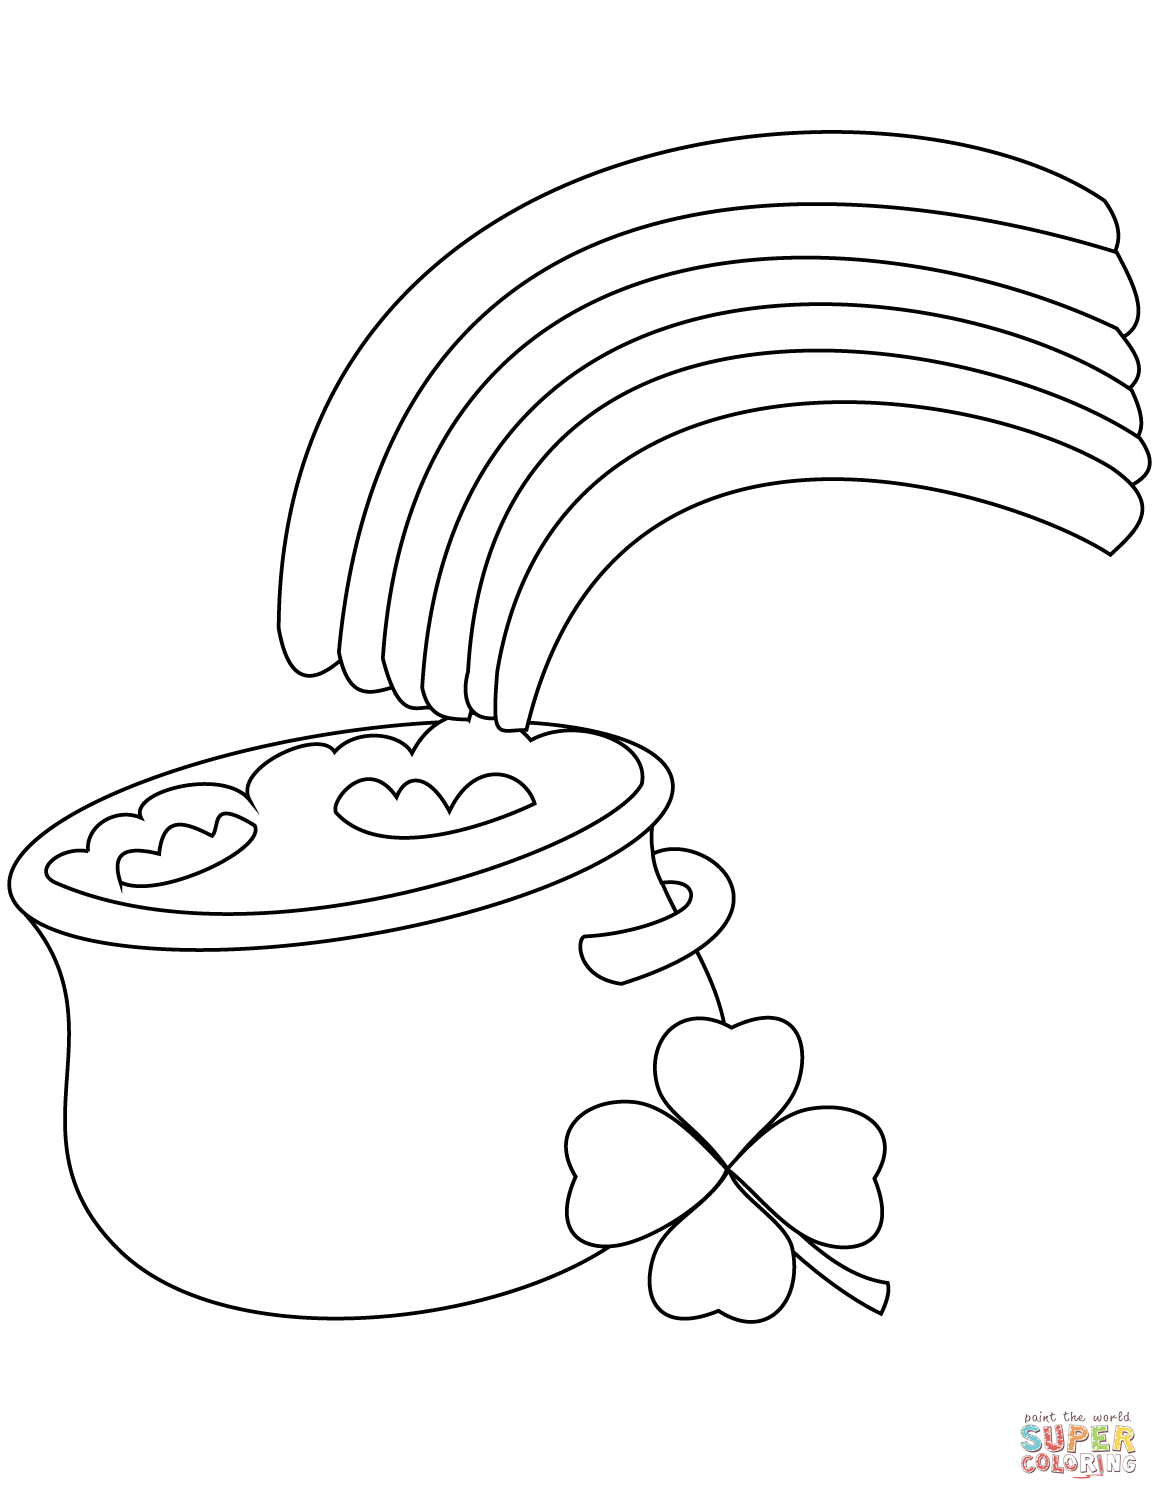 Rainbow And Pot Of Gold Coloring Page | Free Printable Coloring Pages - Free Printable Pot Of Gold Coloring Pages